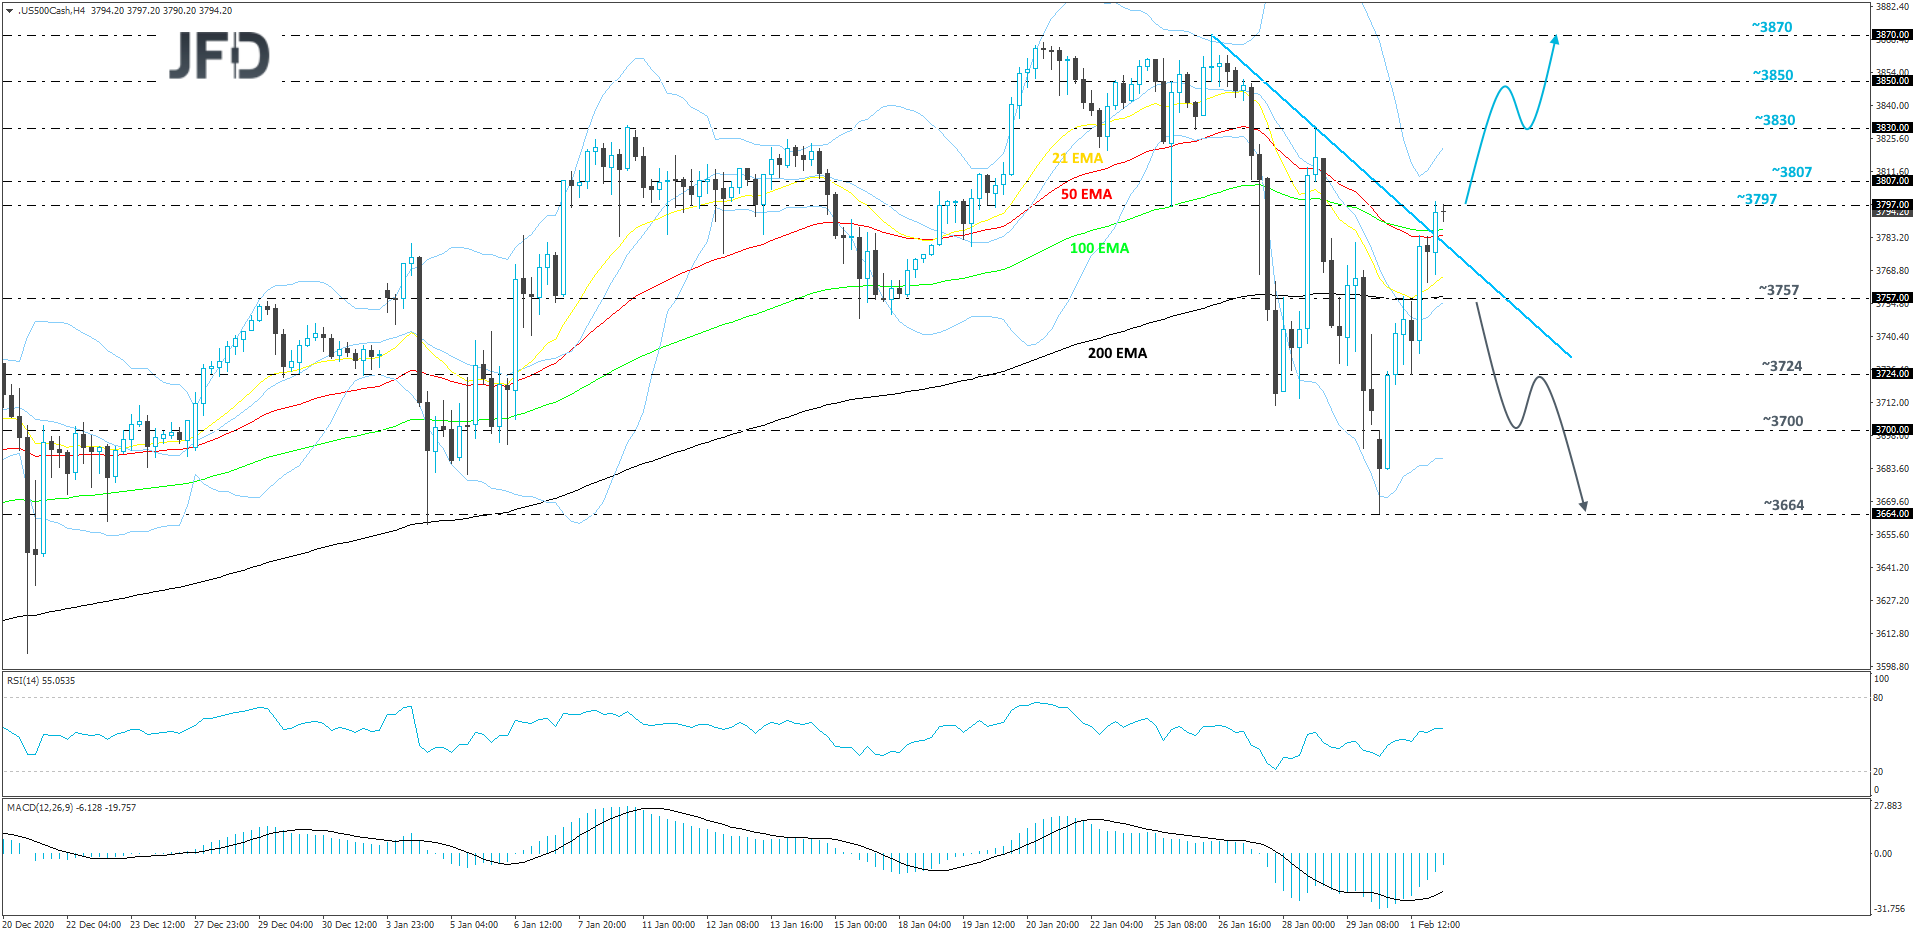 S&P 500 cash index 4-hour chart technical analysis